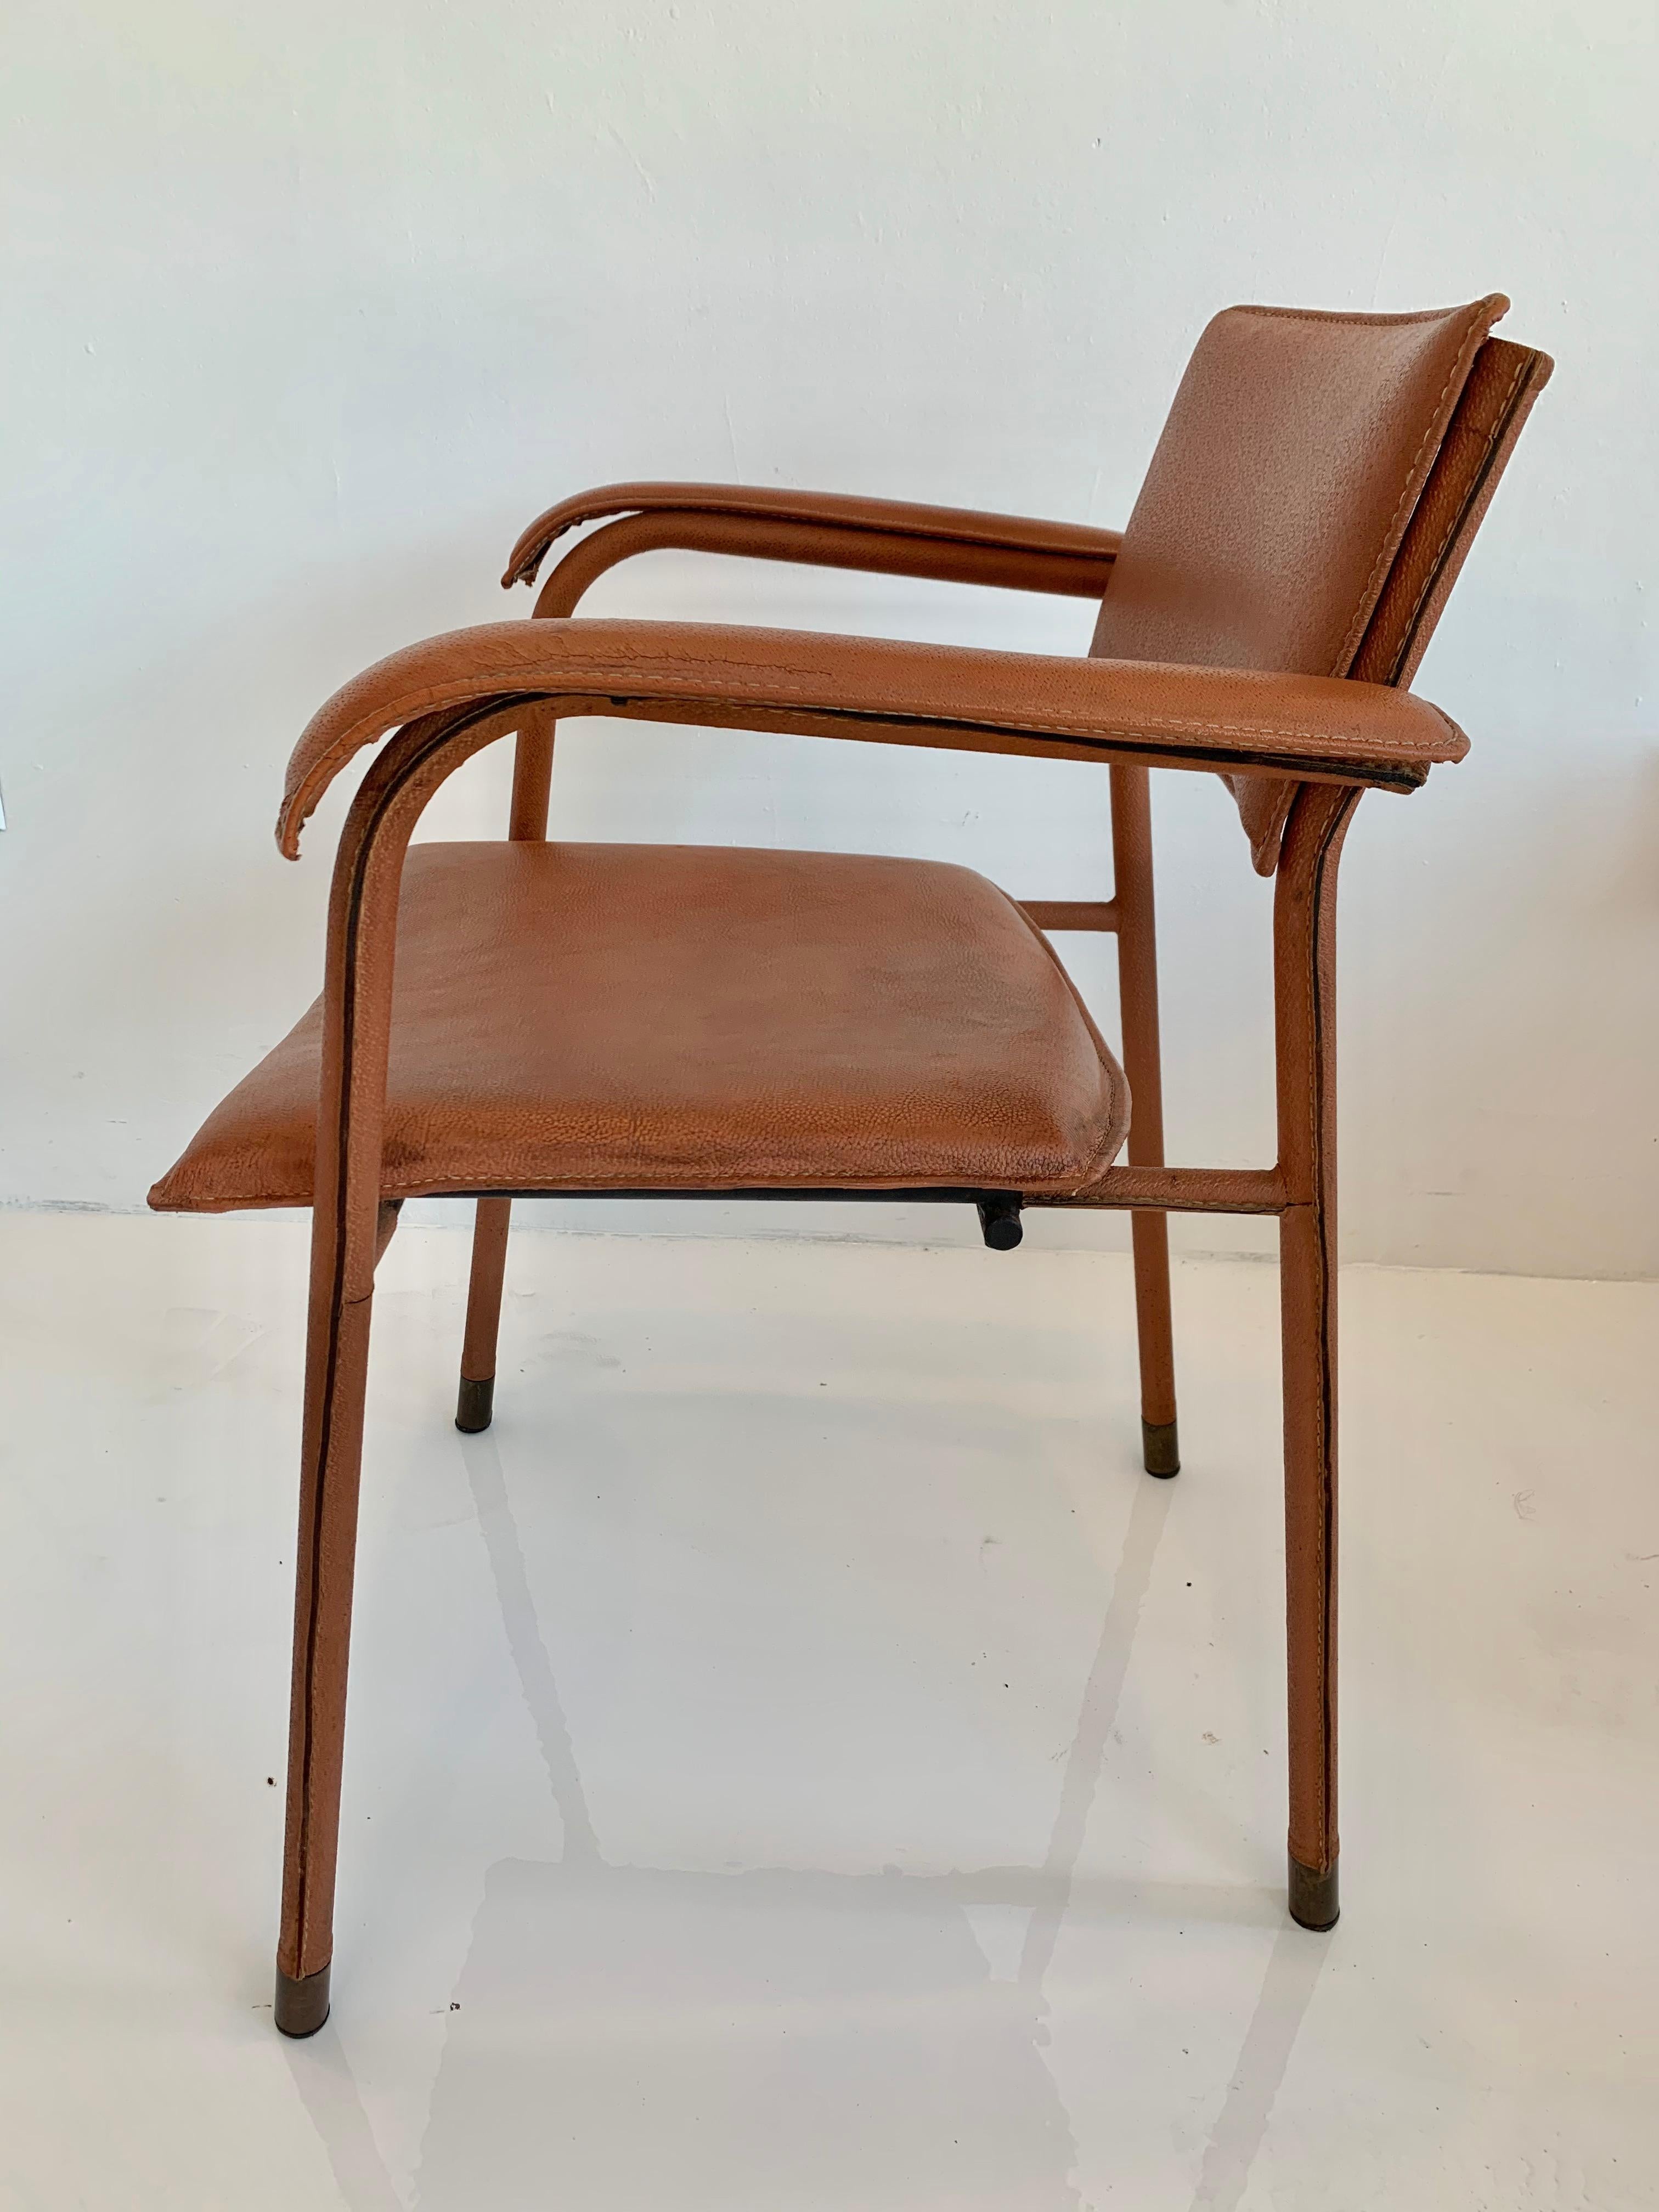 Rare leather and iron armchair by French designer Jacques Adnet. Entire chair is wrapped in handstitched leather. Brass capped feet and brass hardware detailing on chair backs. Seat bottom, seat back, arms, and frame detailing all wrapped in